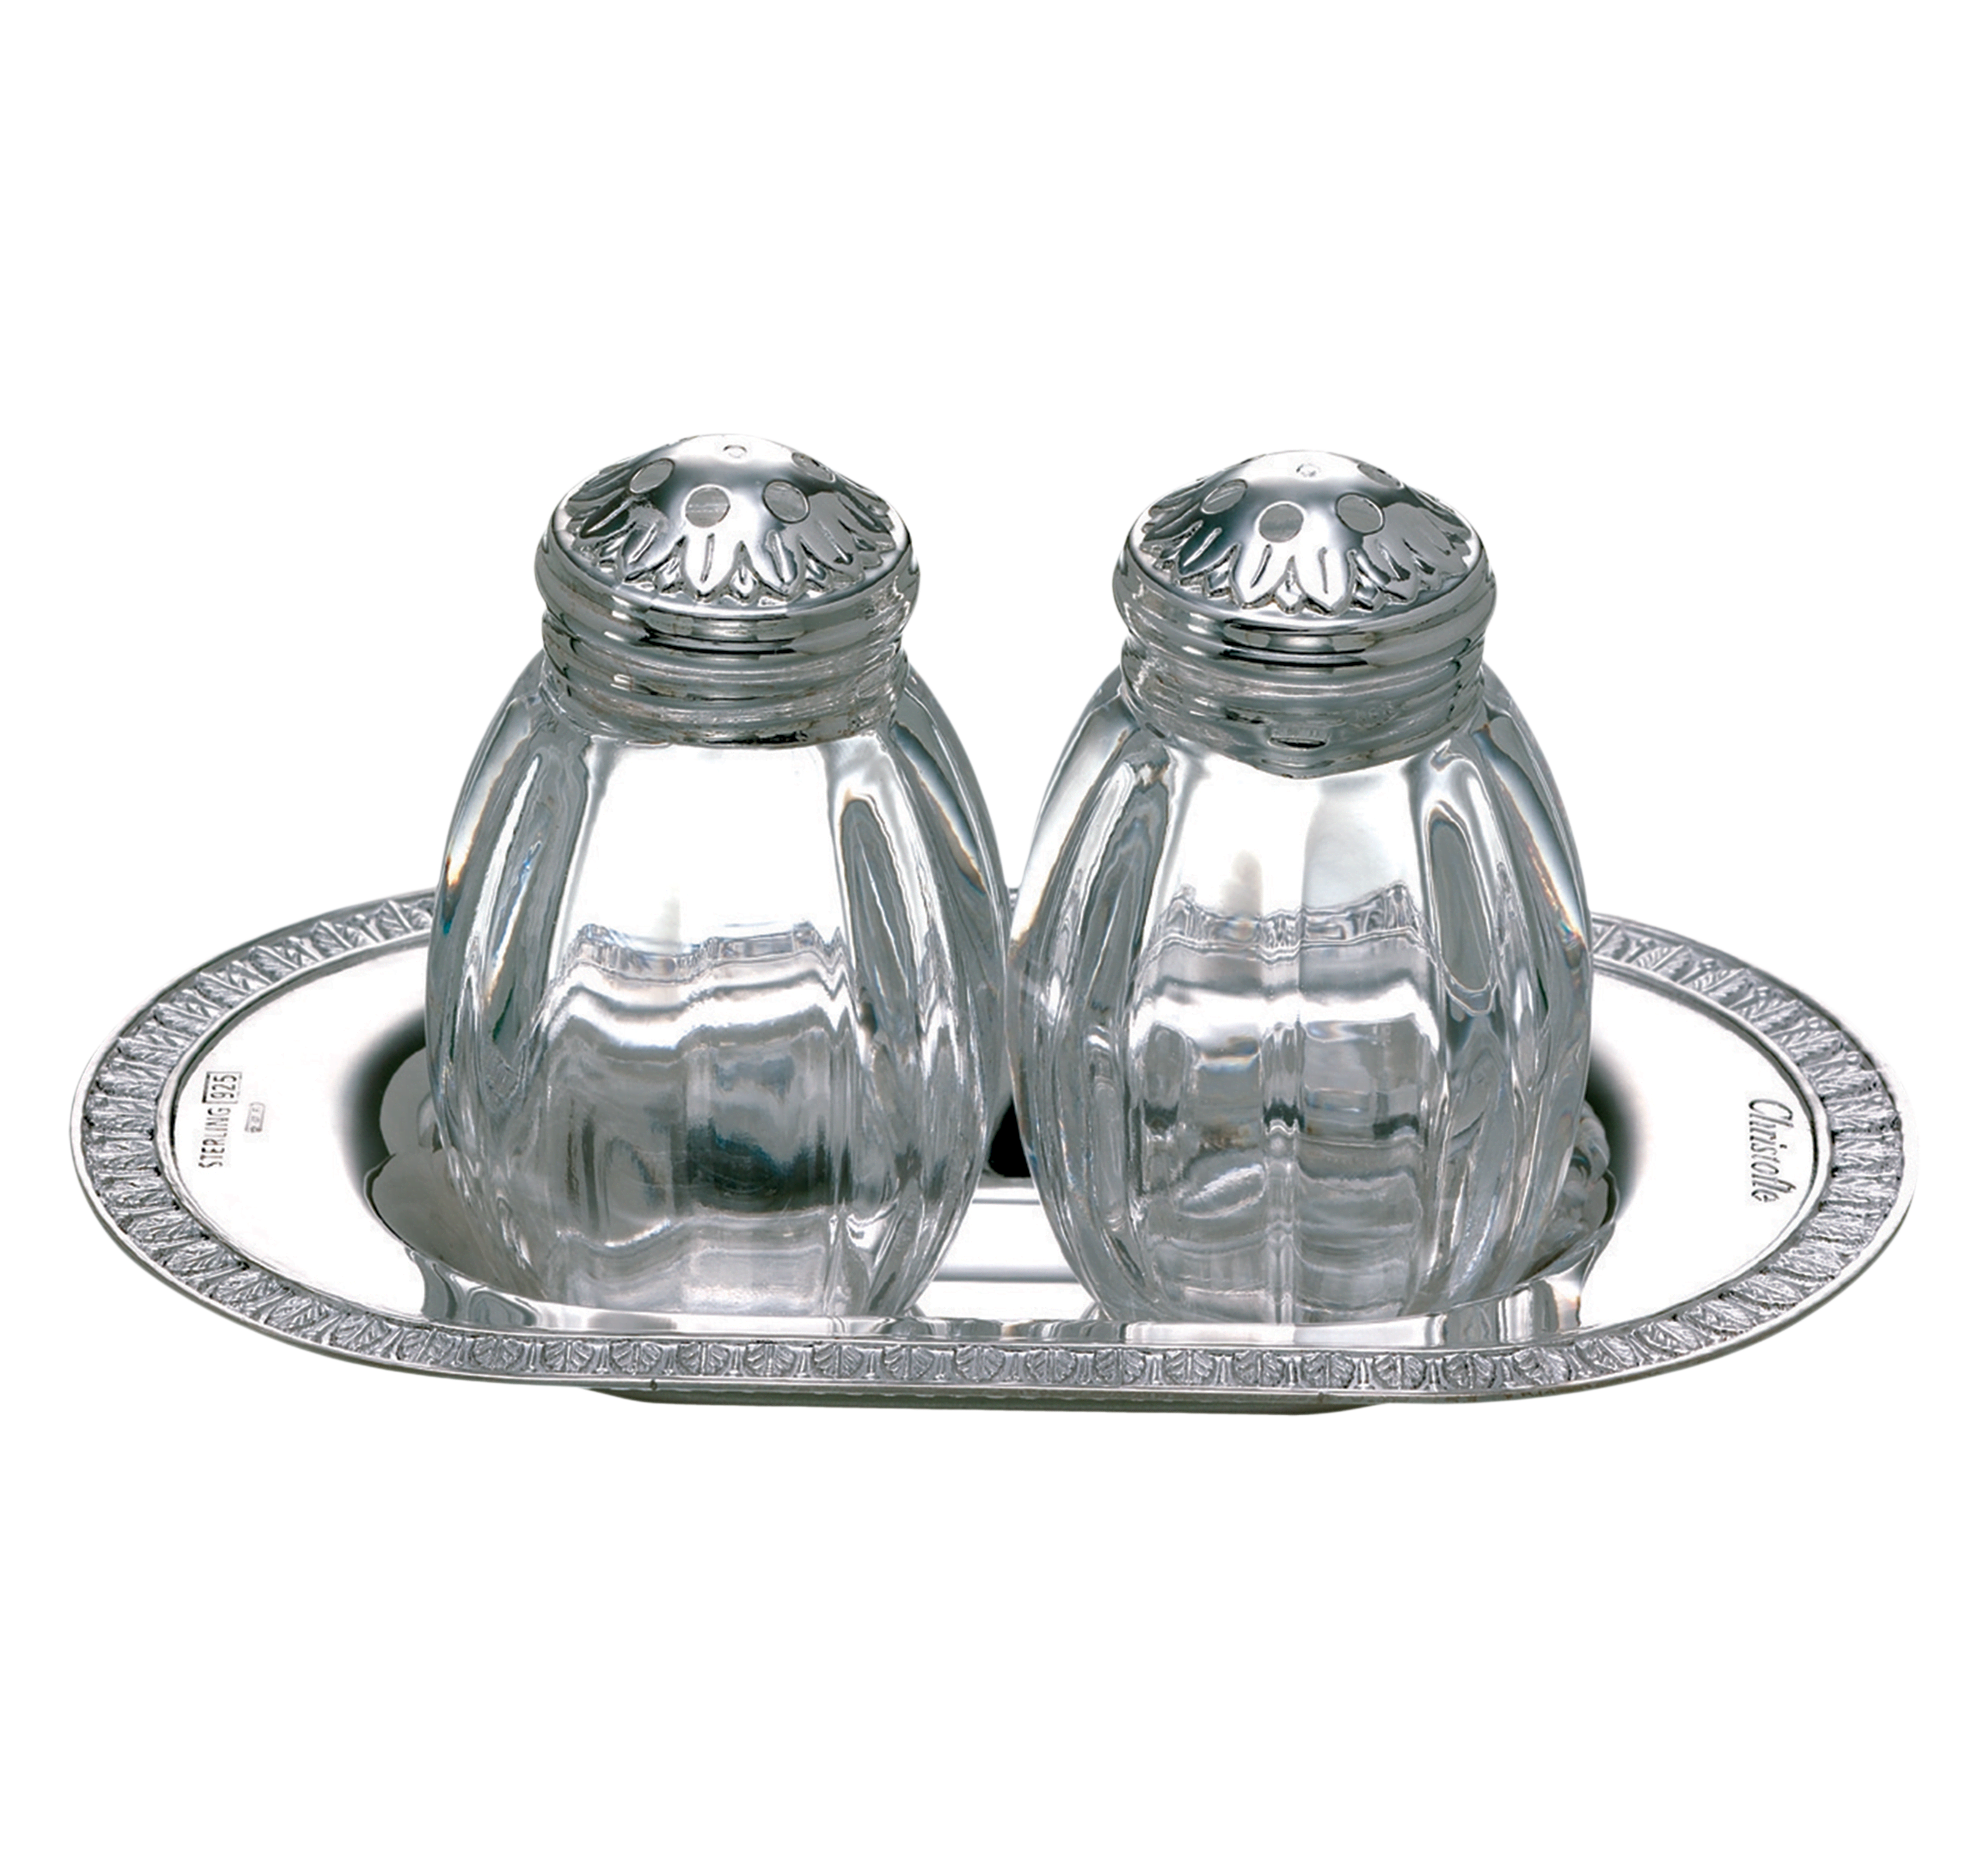 Unique Salt And Pepper Shakers - Foter